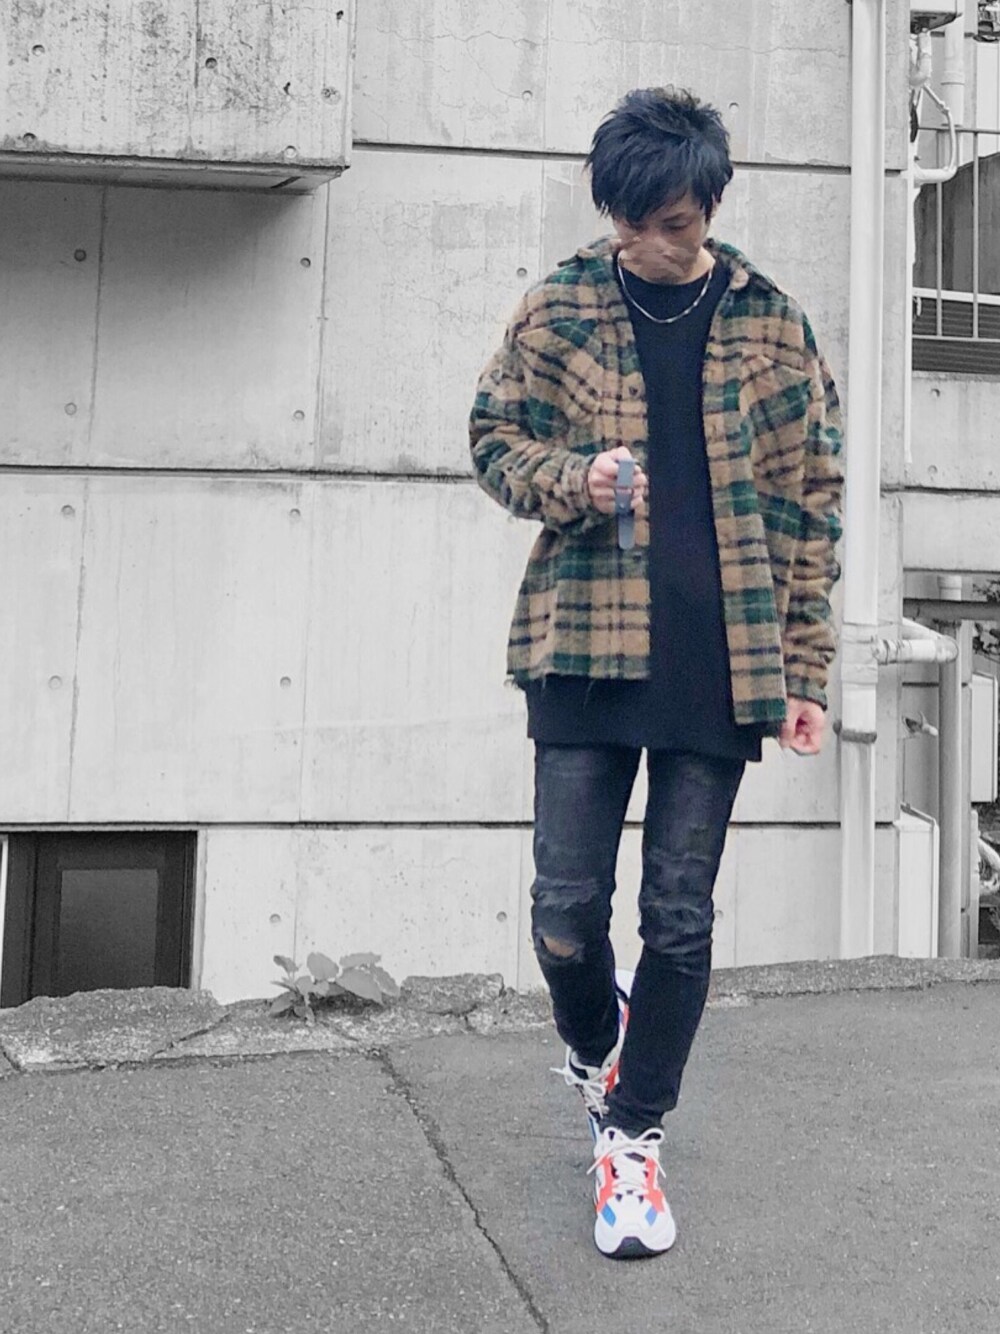 mnml LOOSE WOVEN FLANNEL SHIRT